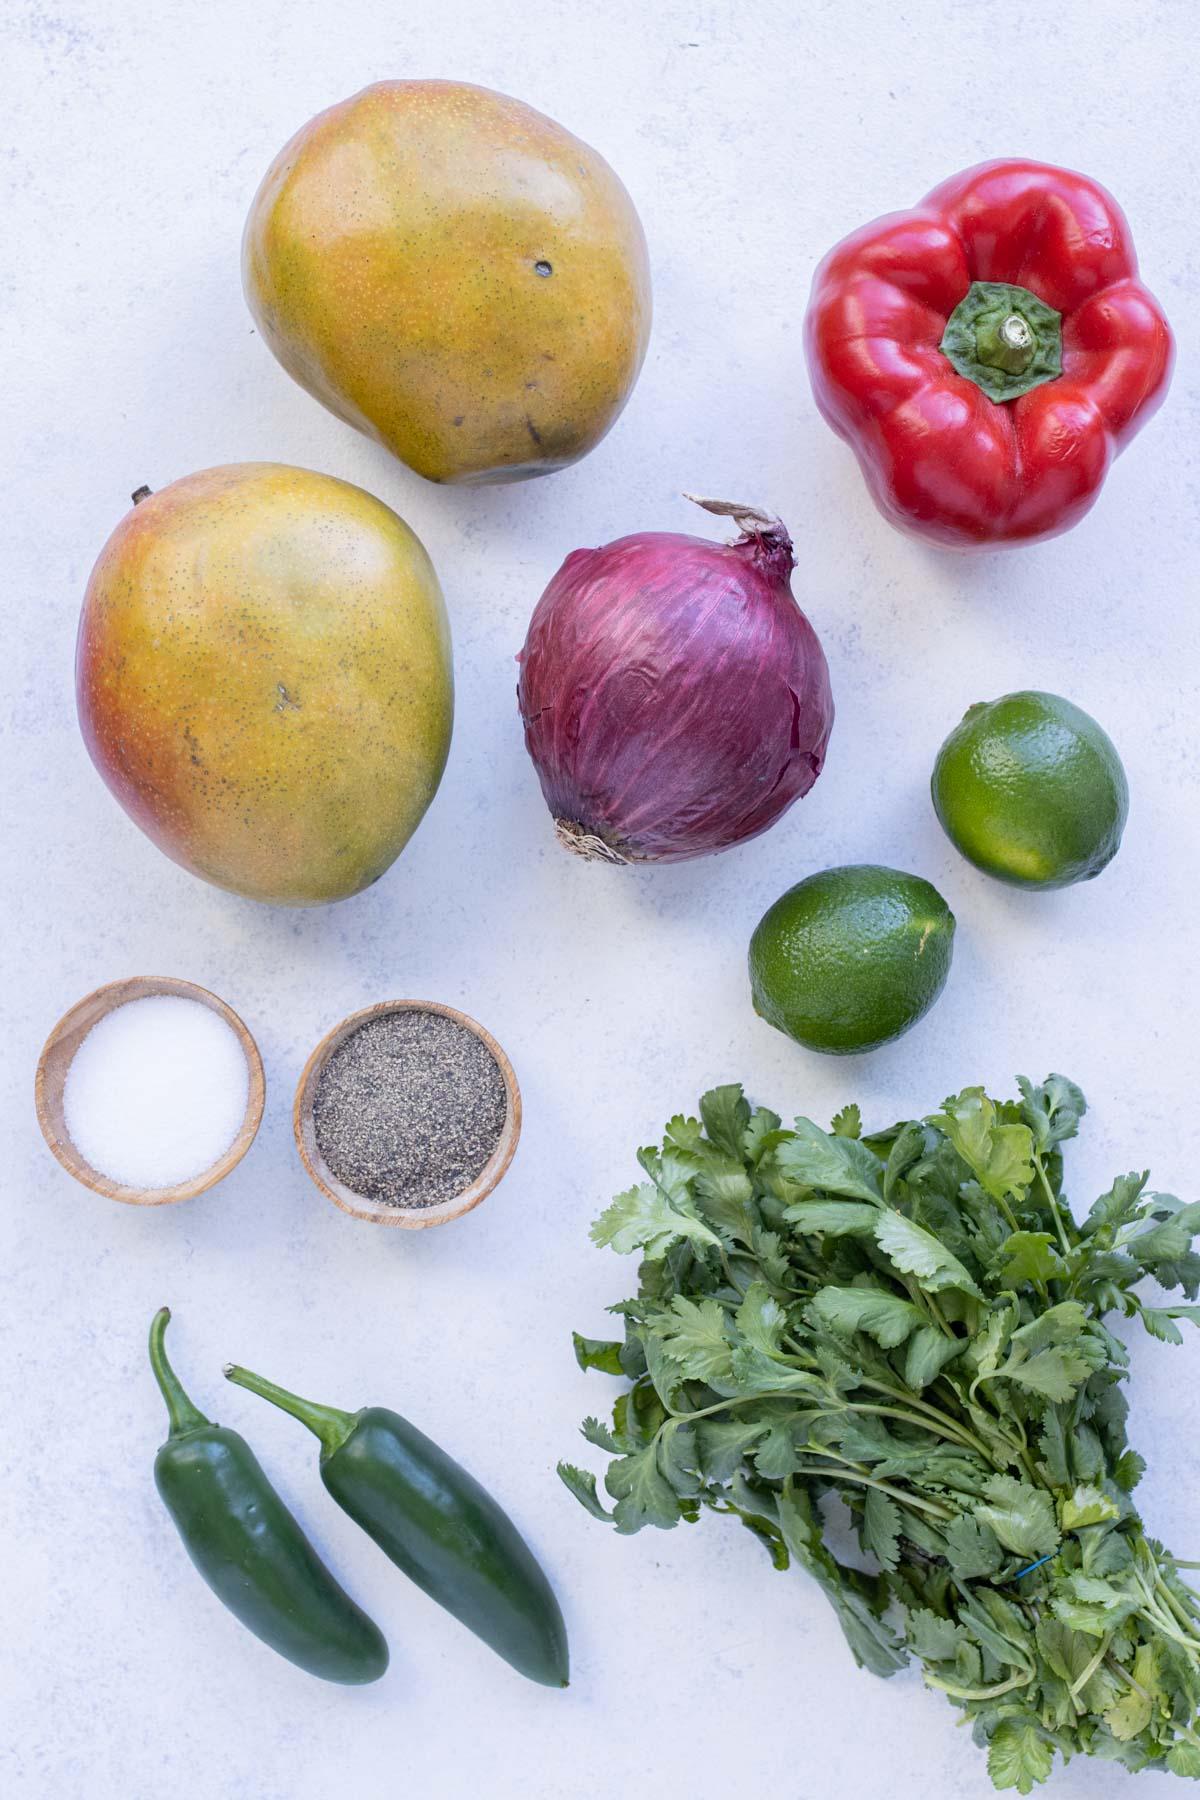 Mangos, cilantro, limes, red onions, bell peppers, jalapeños, salt, and pepper are the ingredients in this recipe.